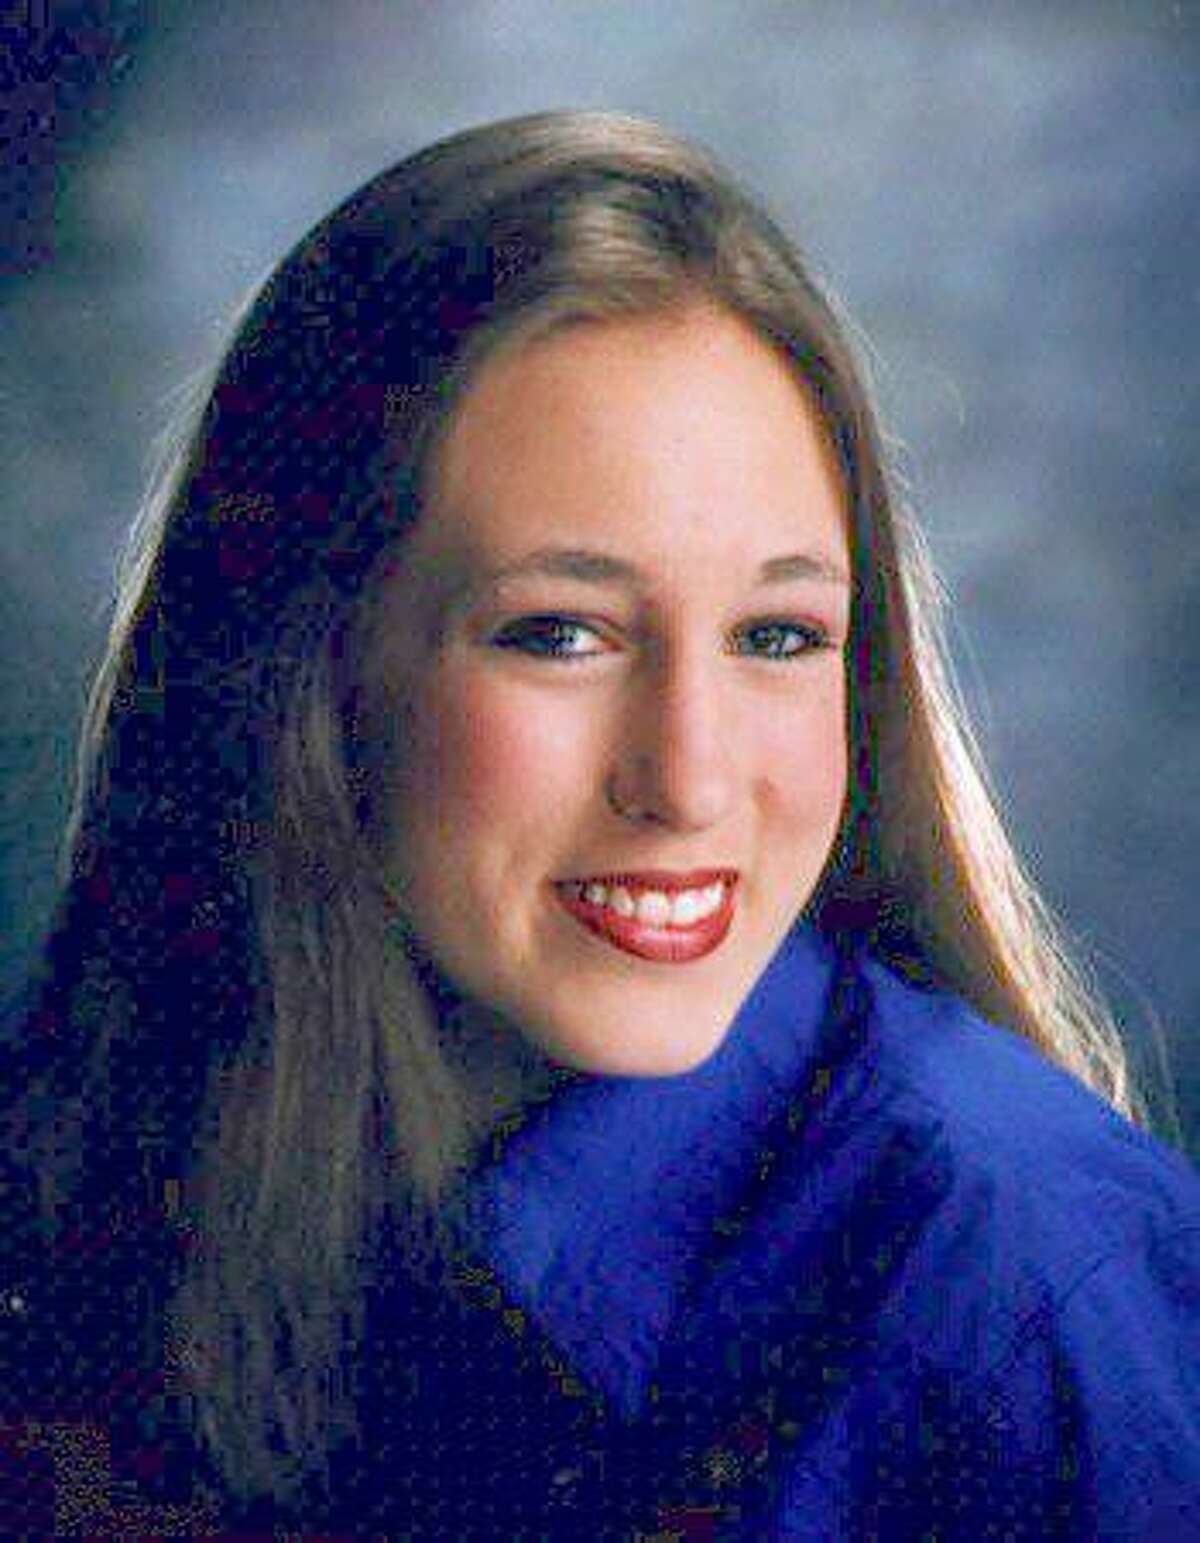 Melissa Trotter was raped and murdered in December 1998. Her body was later found in the forest, some 70 miles north of Houston.